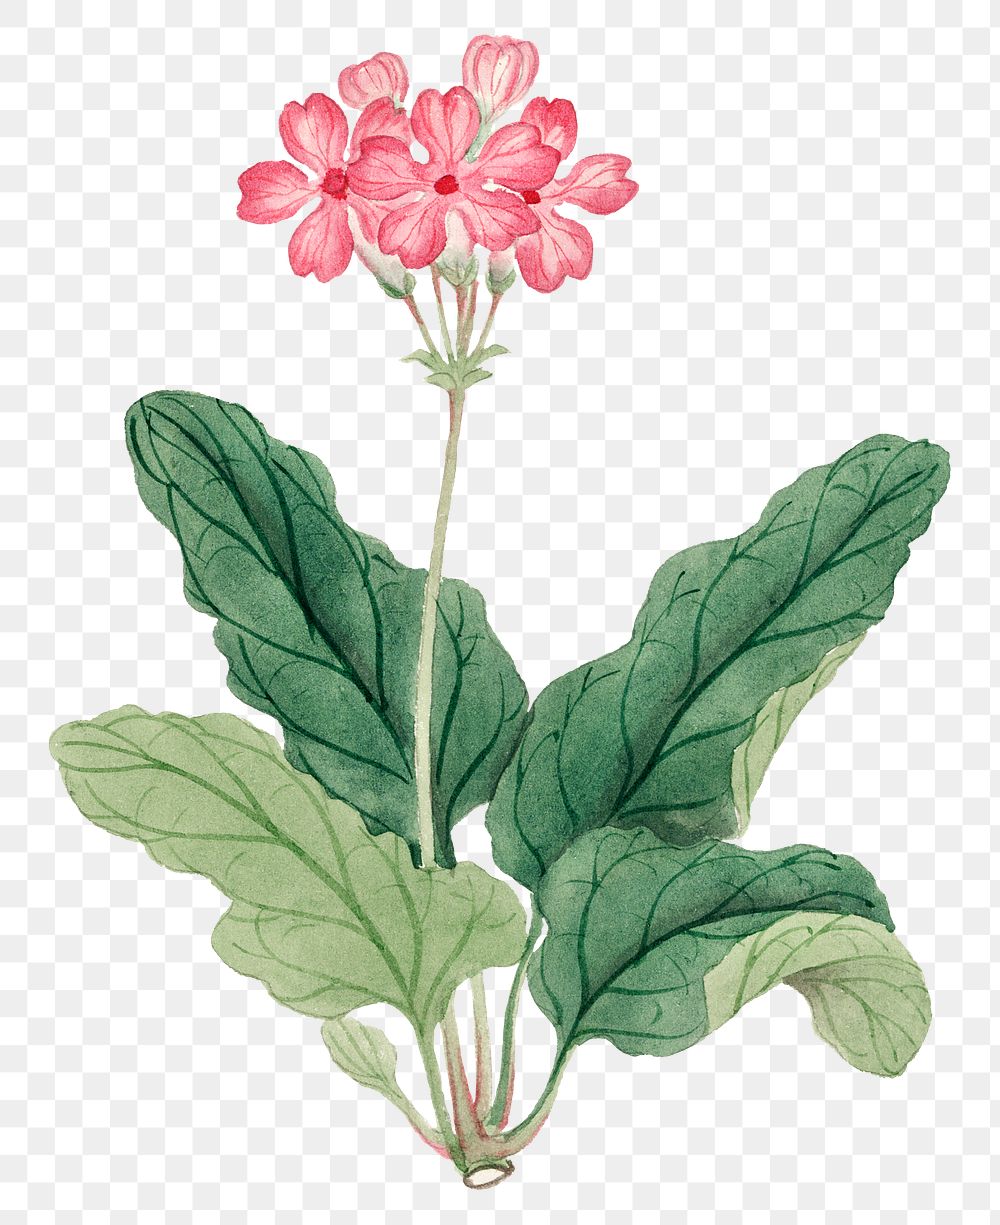 Flower png Pink Geranium, vintage Japanese art remix from the David Murray collection